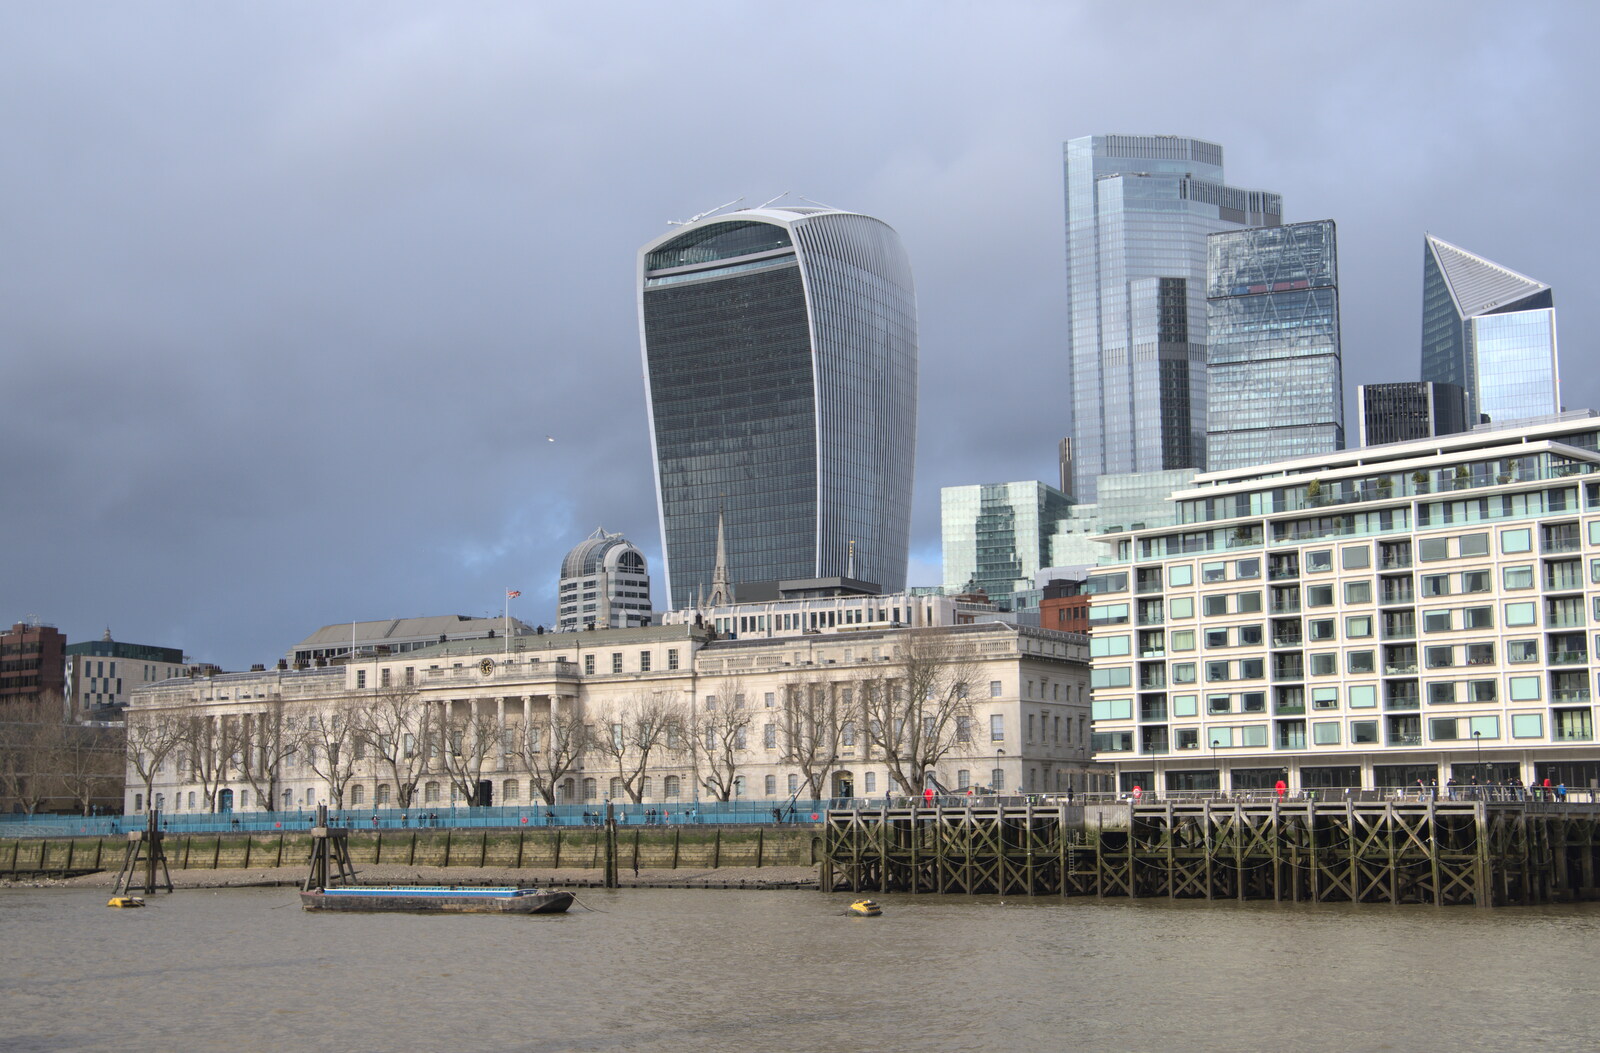 The Walkie Talkie again from HMS Belfast and the South Bank, Southwark, London - 17th February 2020